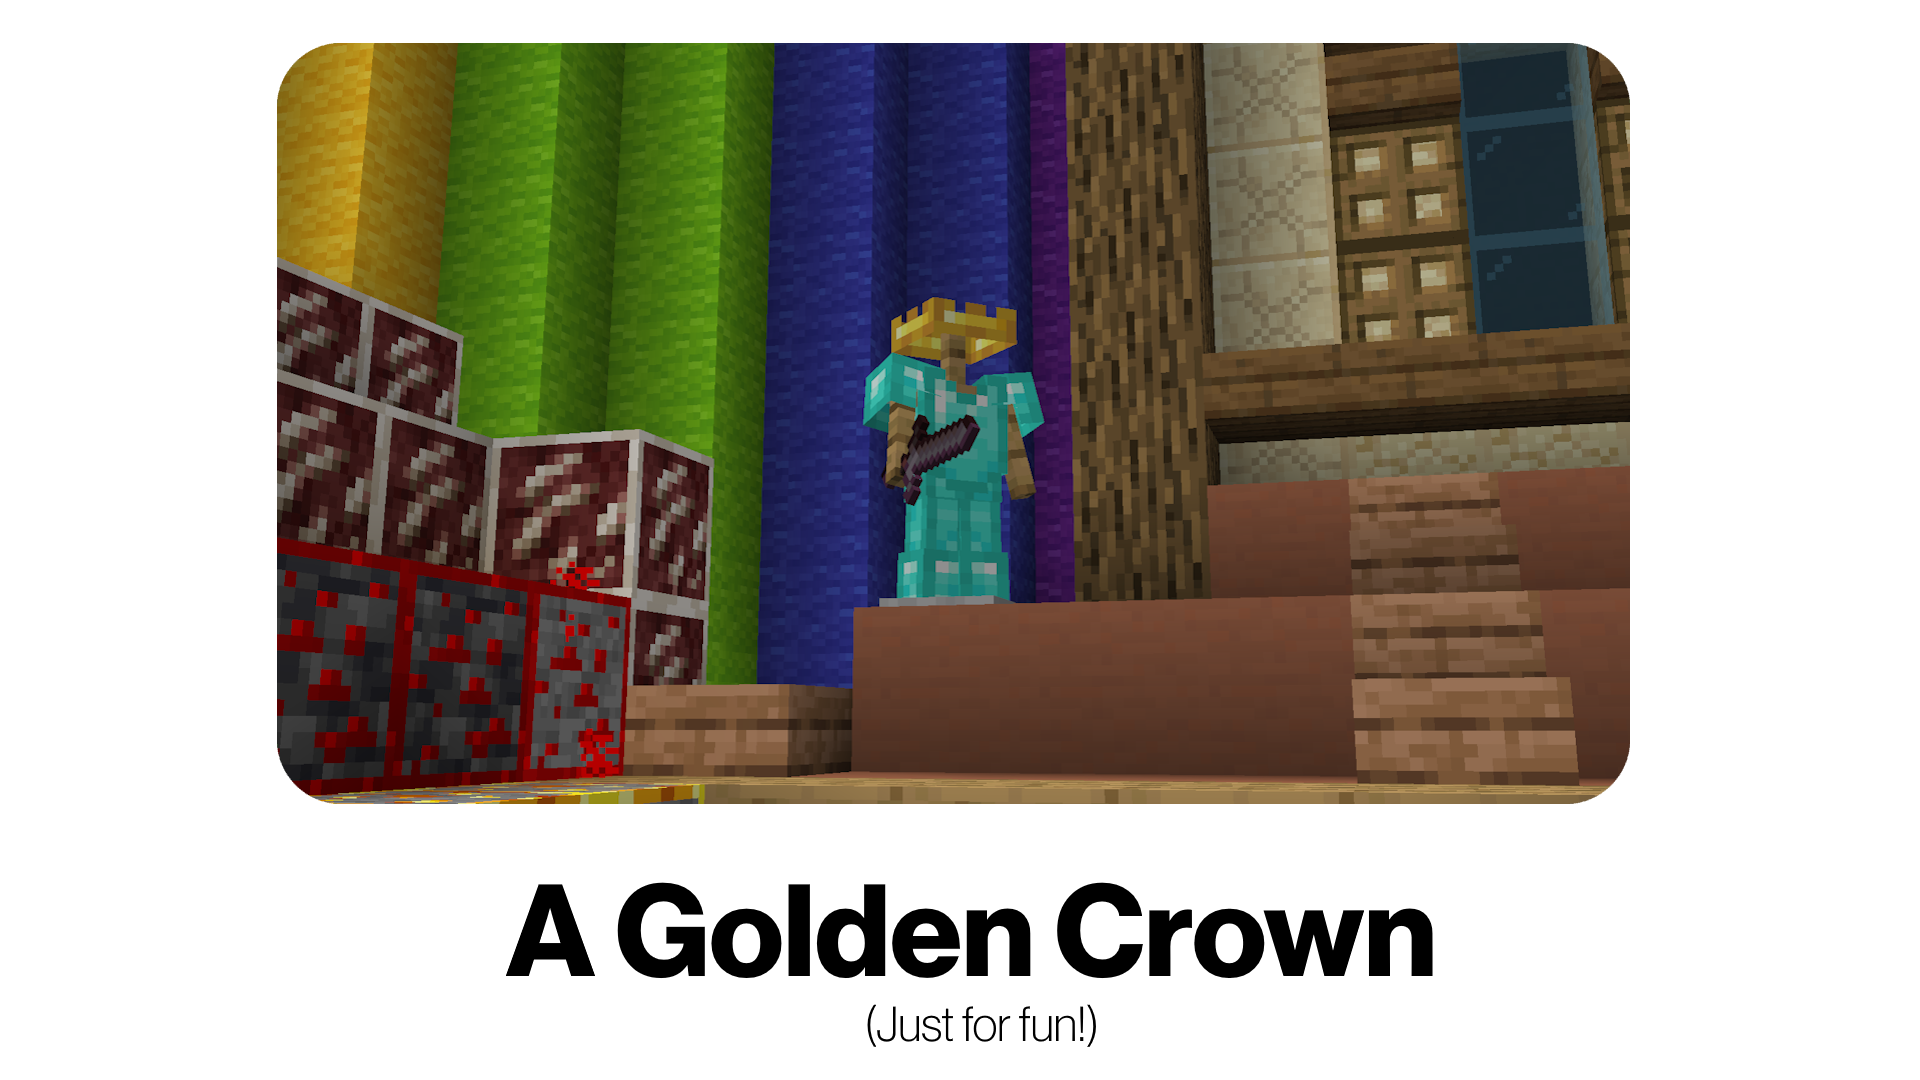 A Golden Crown (Just for fun)